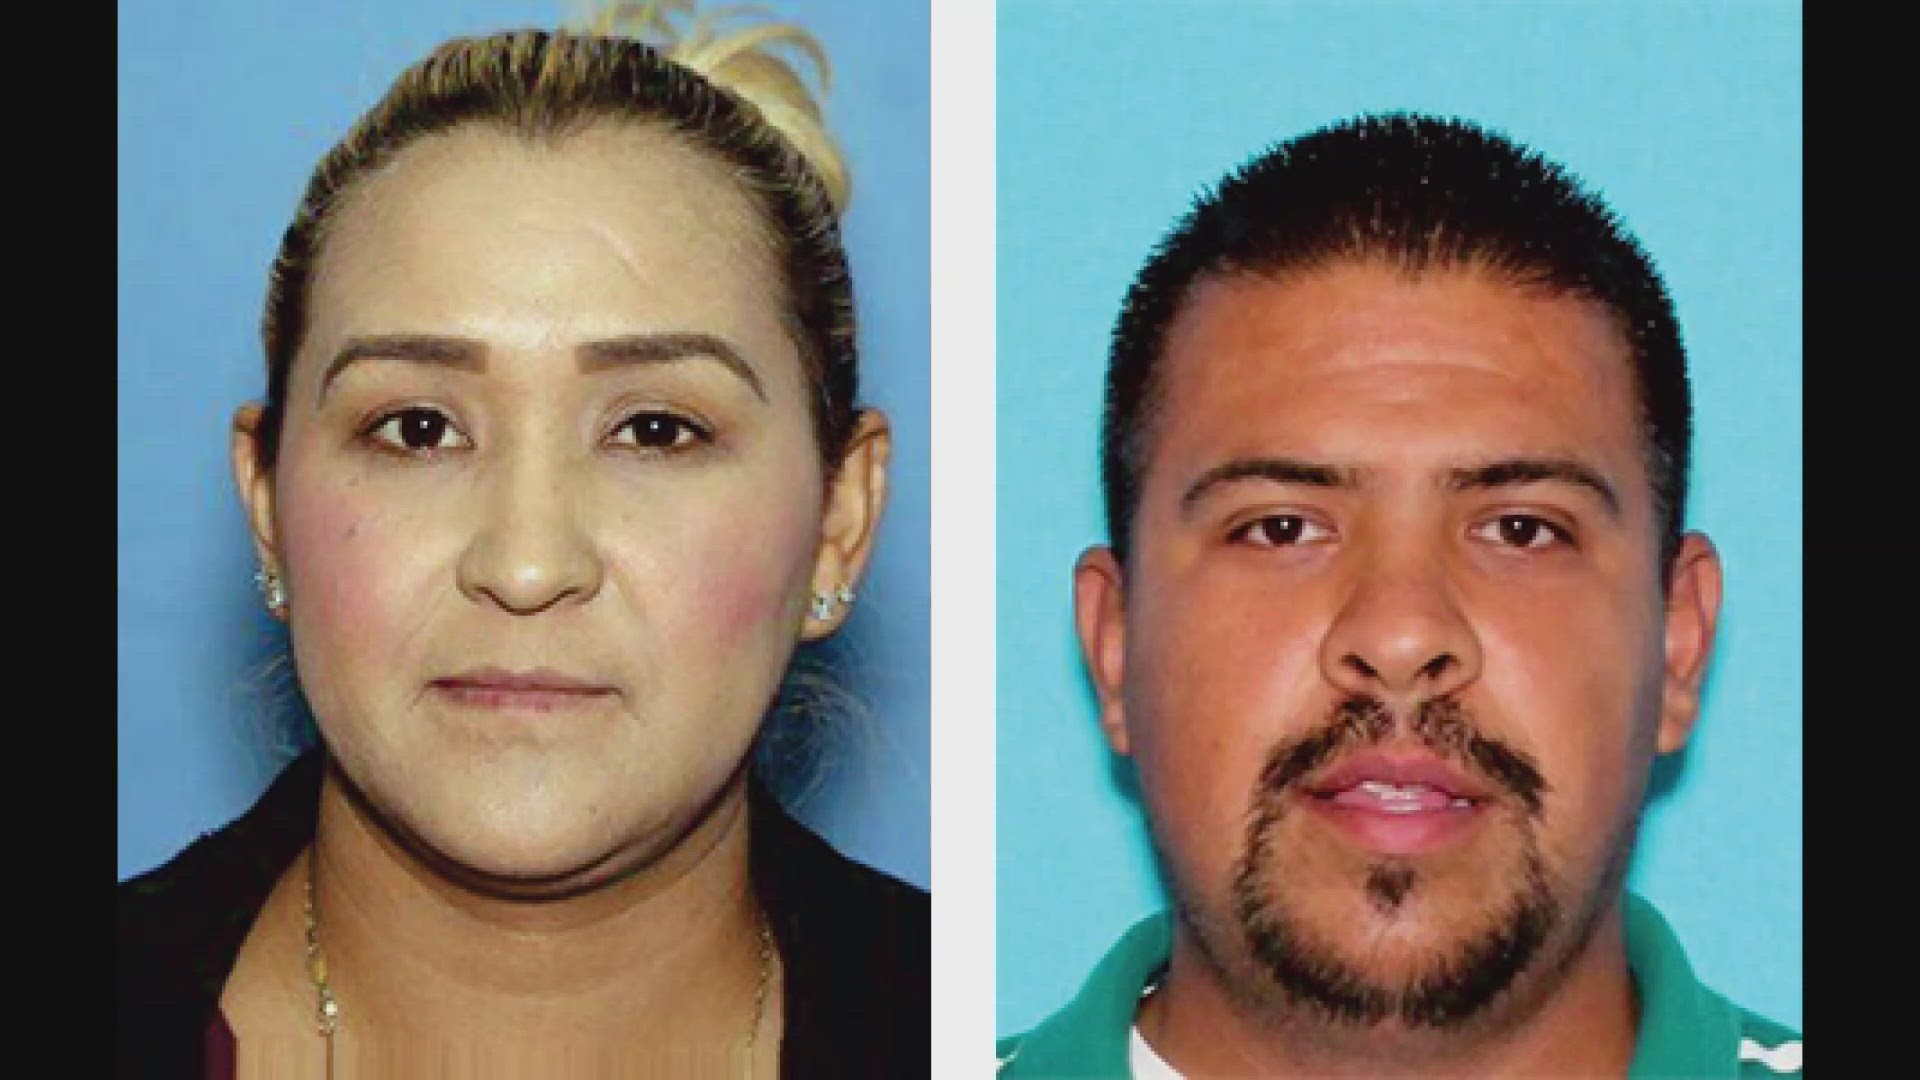 Washington couple on US Marshals Most Wanted list arrested in Mexico, 5 of their children rescued king5